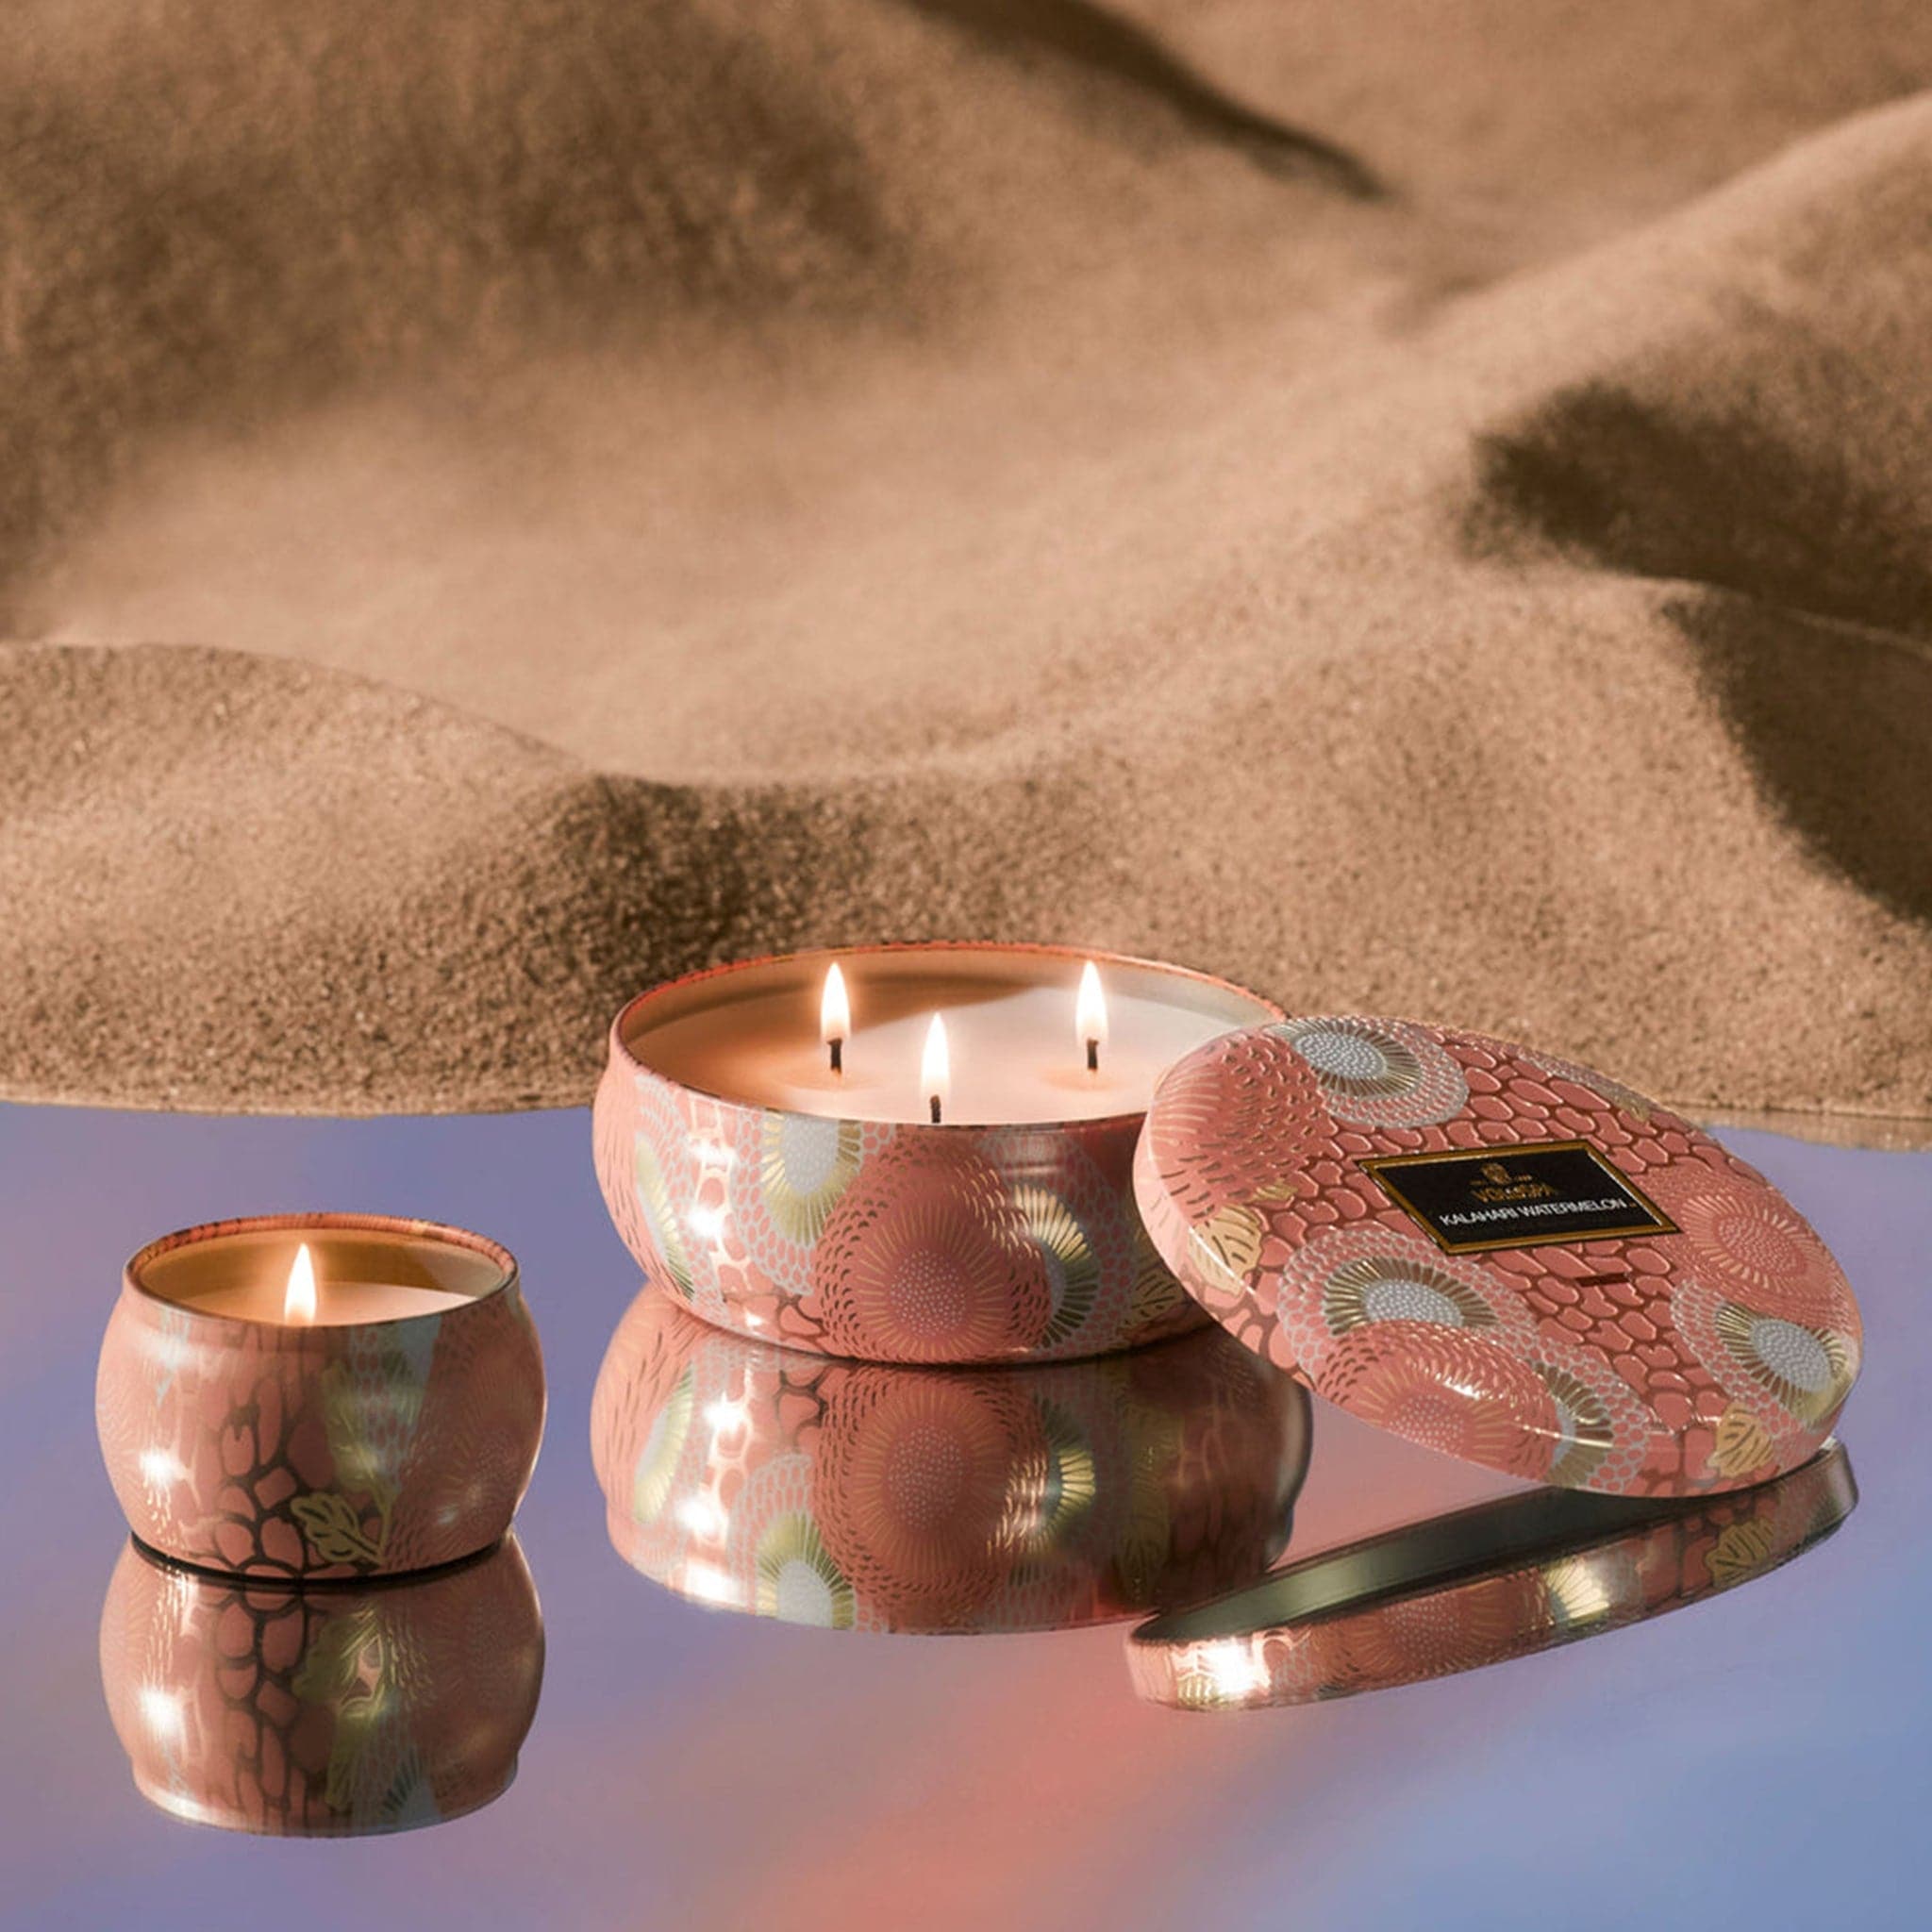 The Kalahari collection shown together with the mini tin and 3-wick tin. Its colors are beautiful and the jar&#39;s tin distributes light in a romantic way.